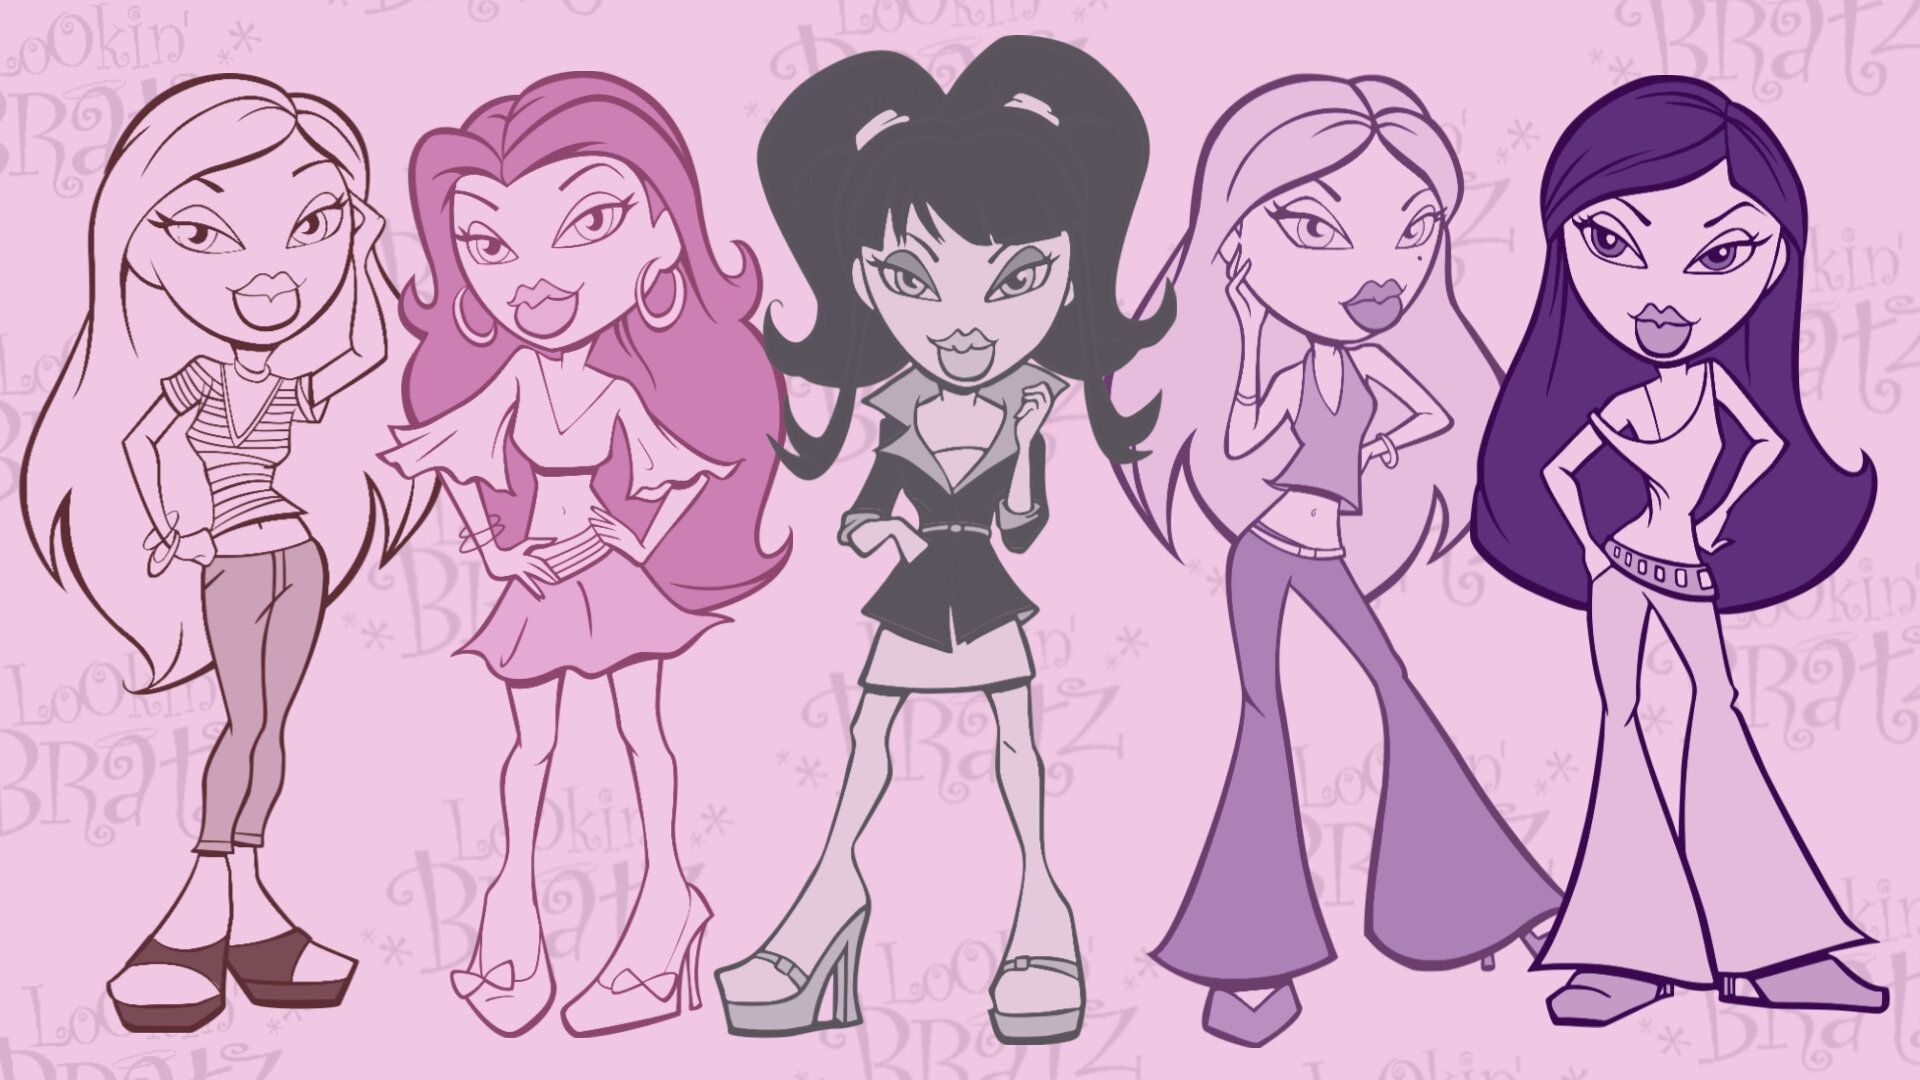 A group of cartoon characters in different poses - Bratz